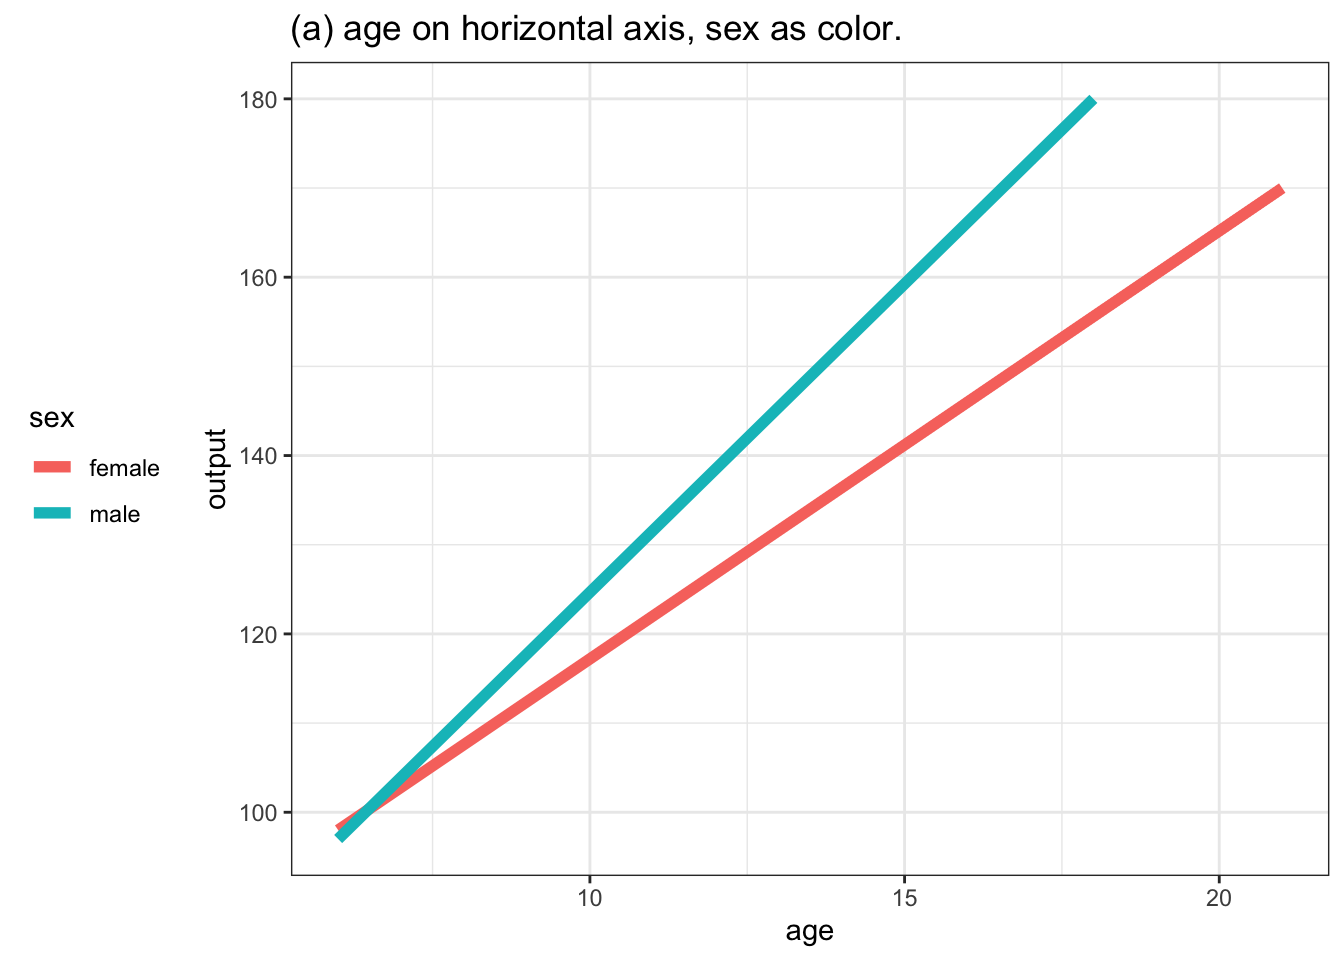 Four ways of graphing the function h(age, sex). (a) and (b) put the quantitative variable age on the horizontal axis and depict sex either with color or facet position. Graphs (c) and (d) use the horizontal axis for sex. Using color or facet for age means that a few discrete values of age must be selected.